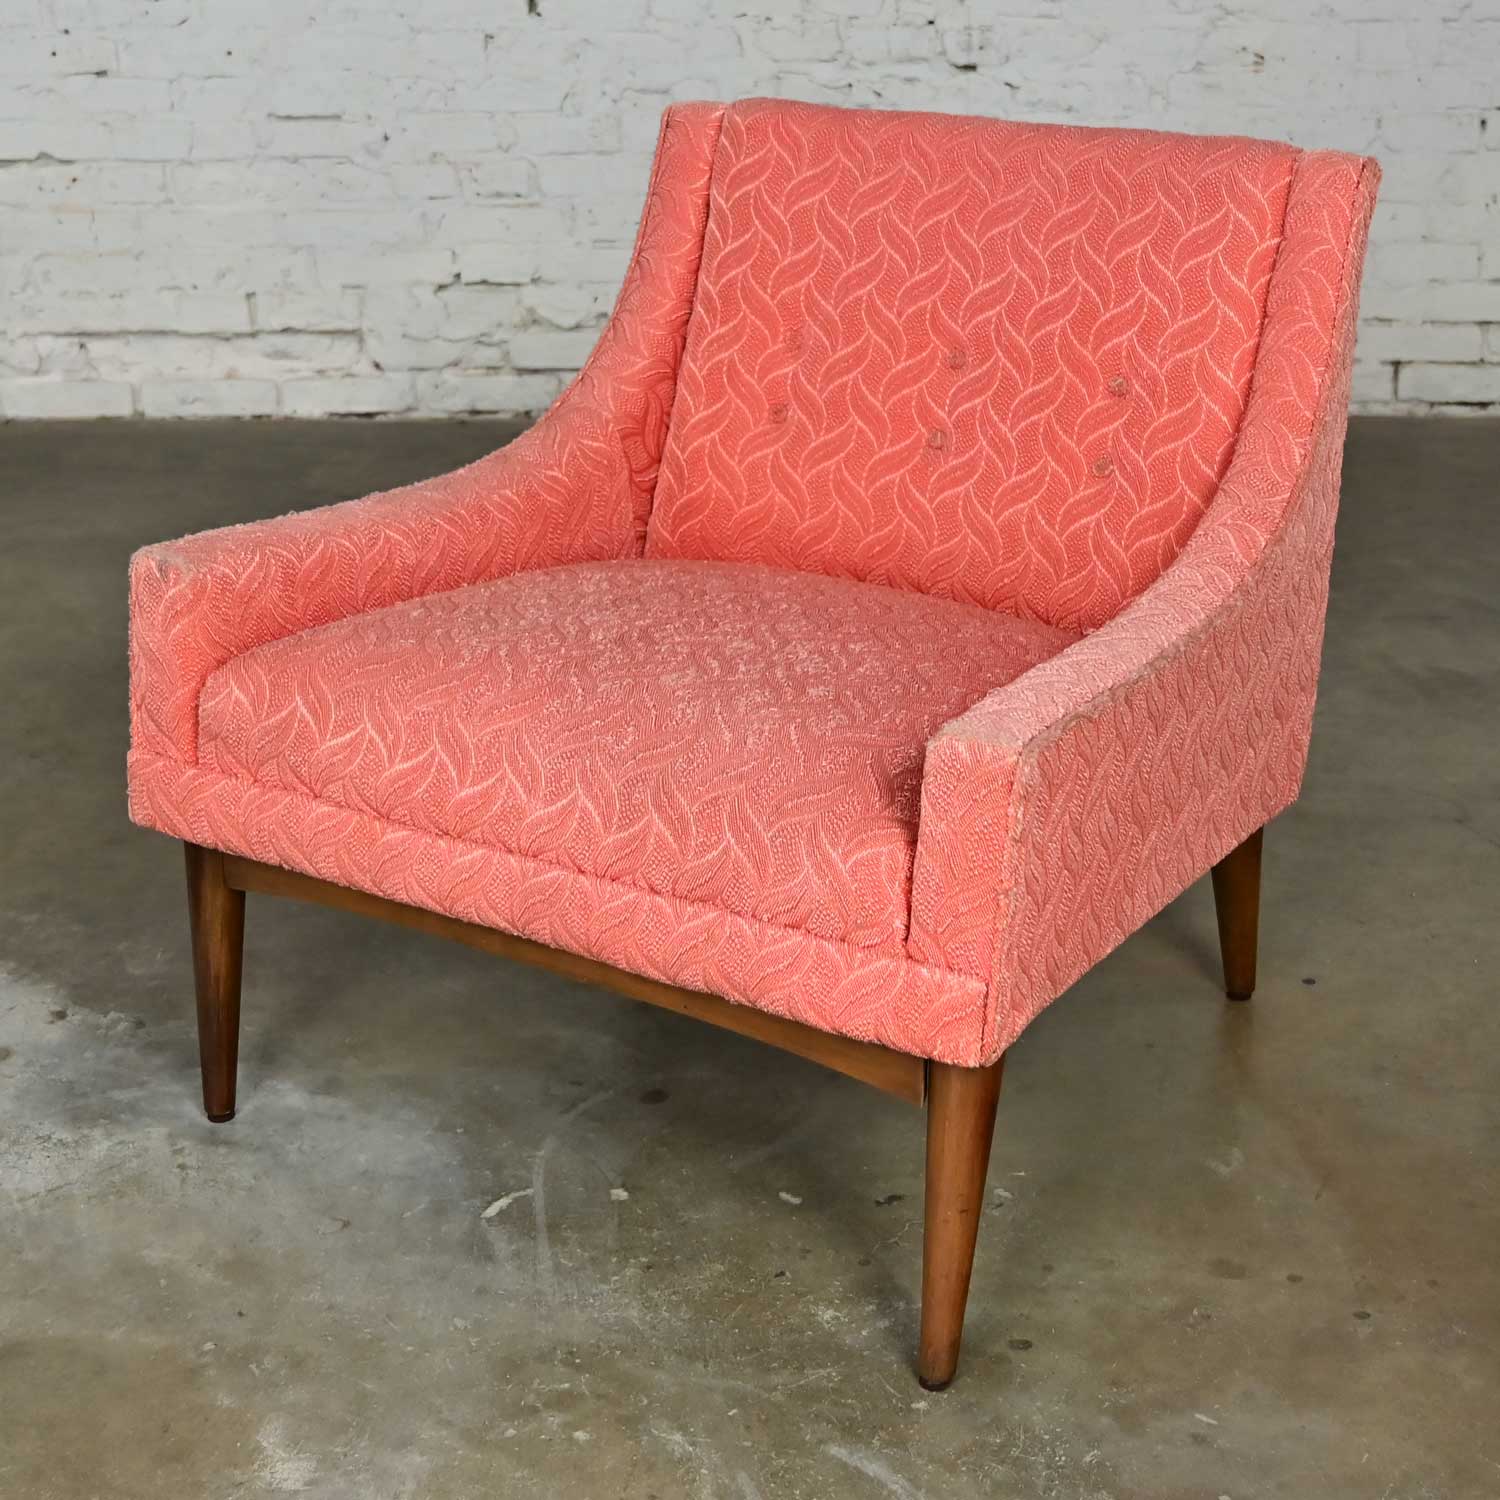 Vintage Mid-Century Modern Coral Frieze Upholstered Modified Slipper Chair For Sale 10